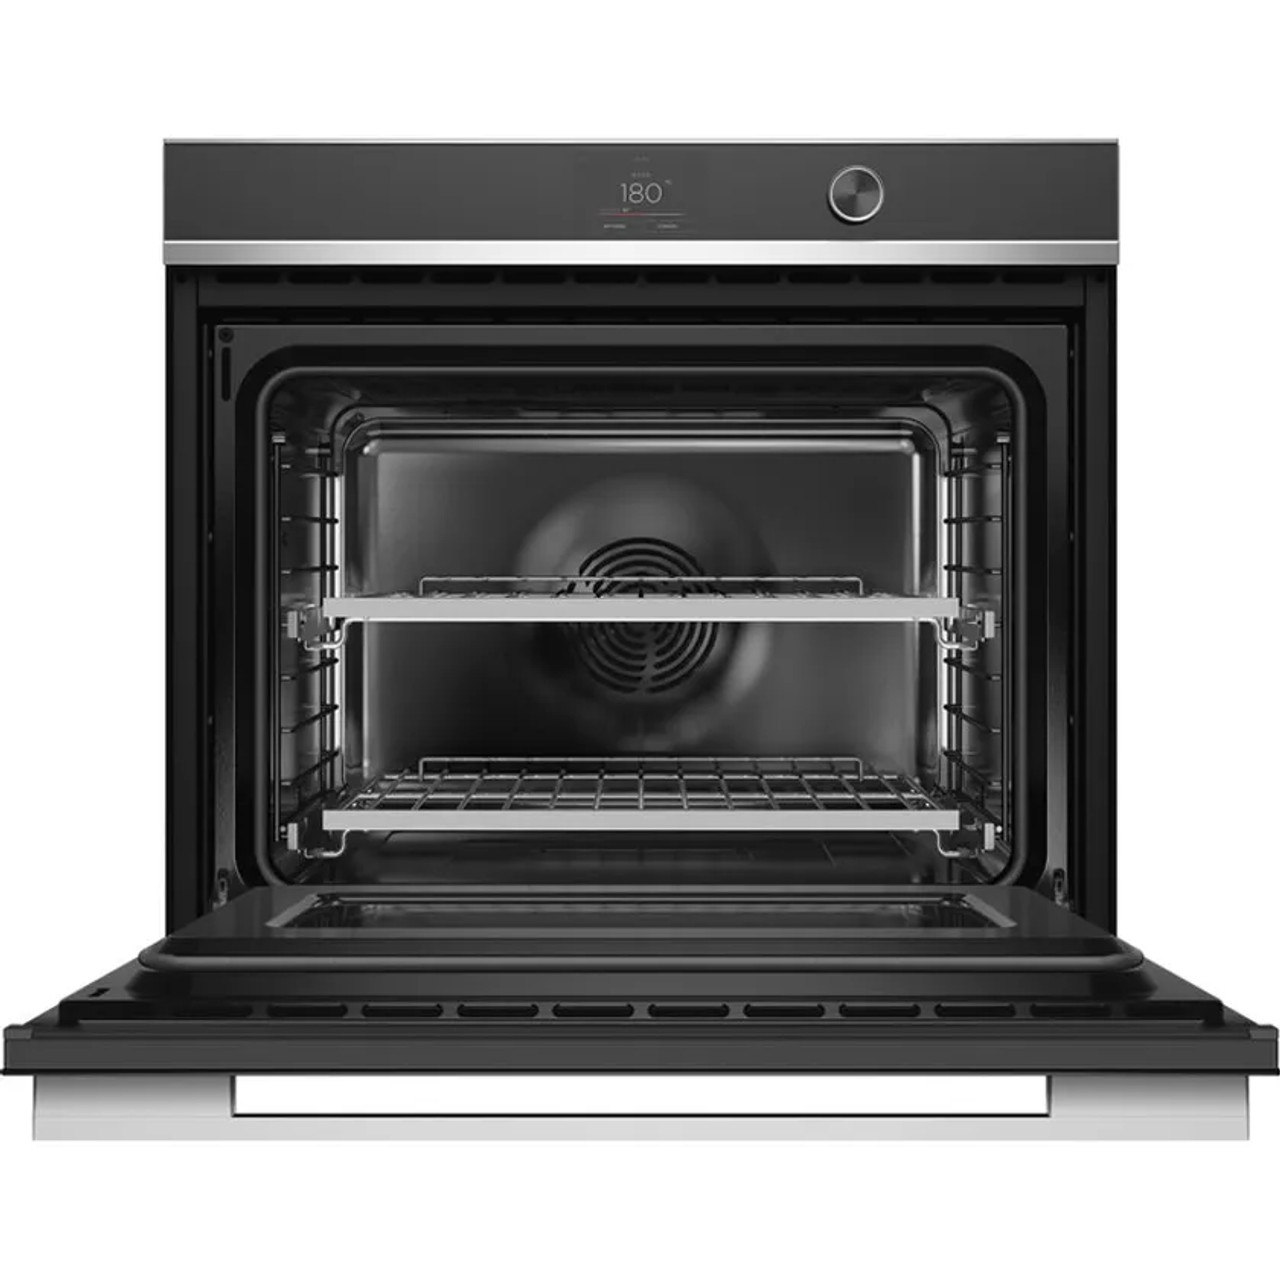 OB76SDPTDX2 -  76cm Pyrolytic Oven - Stainless Steel